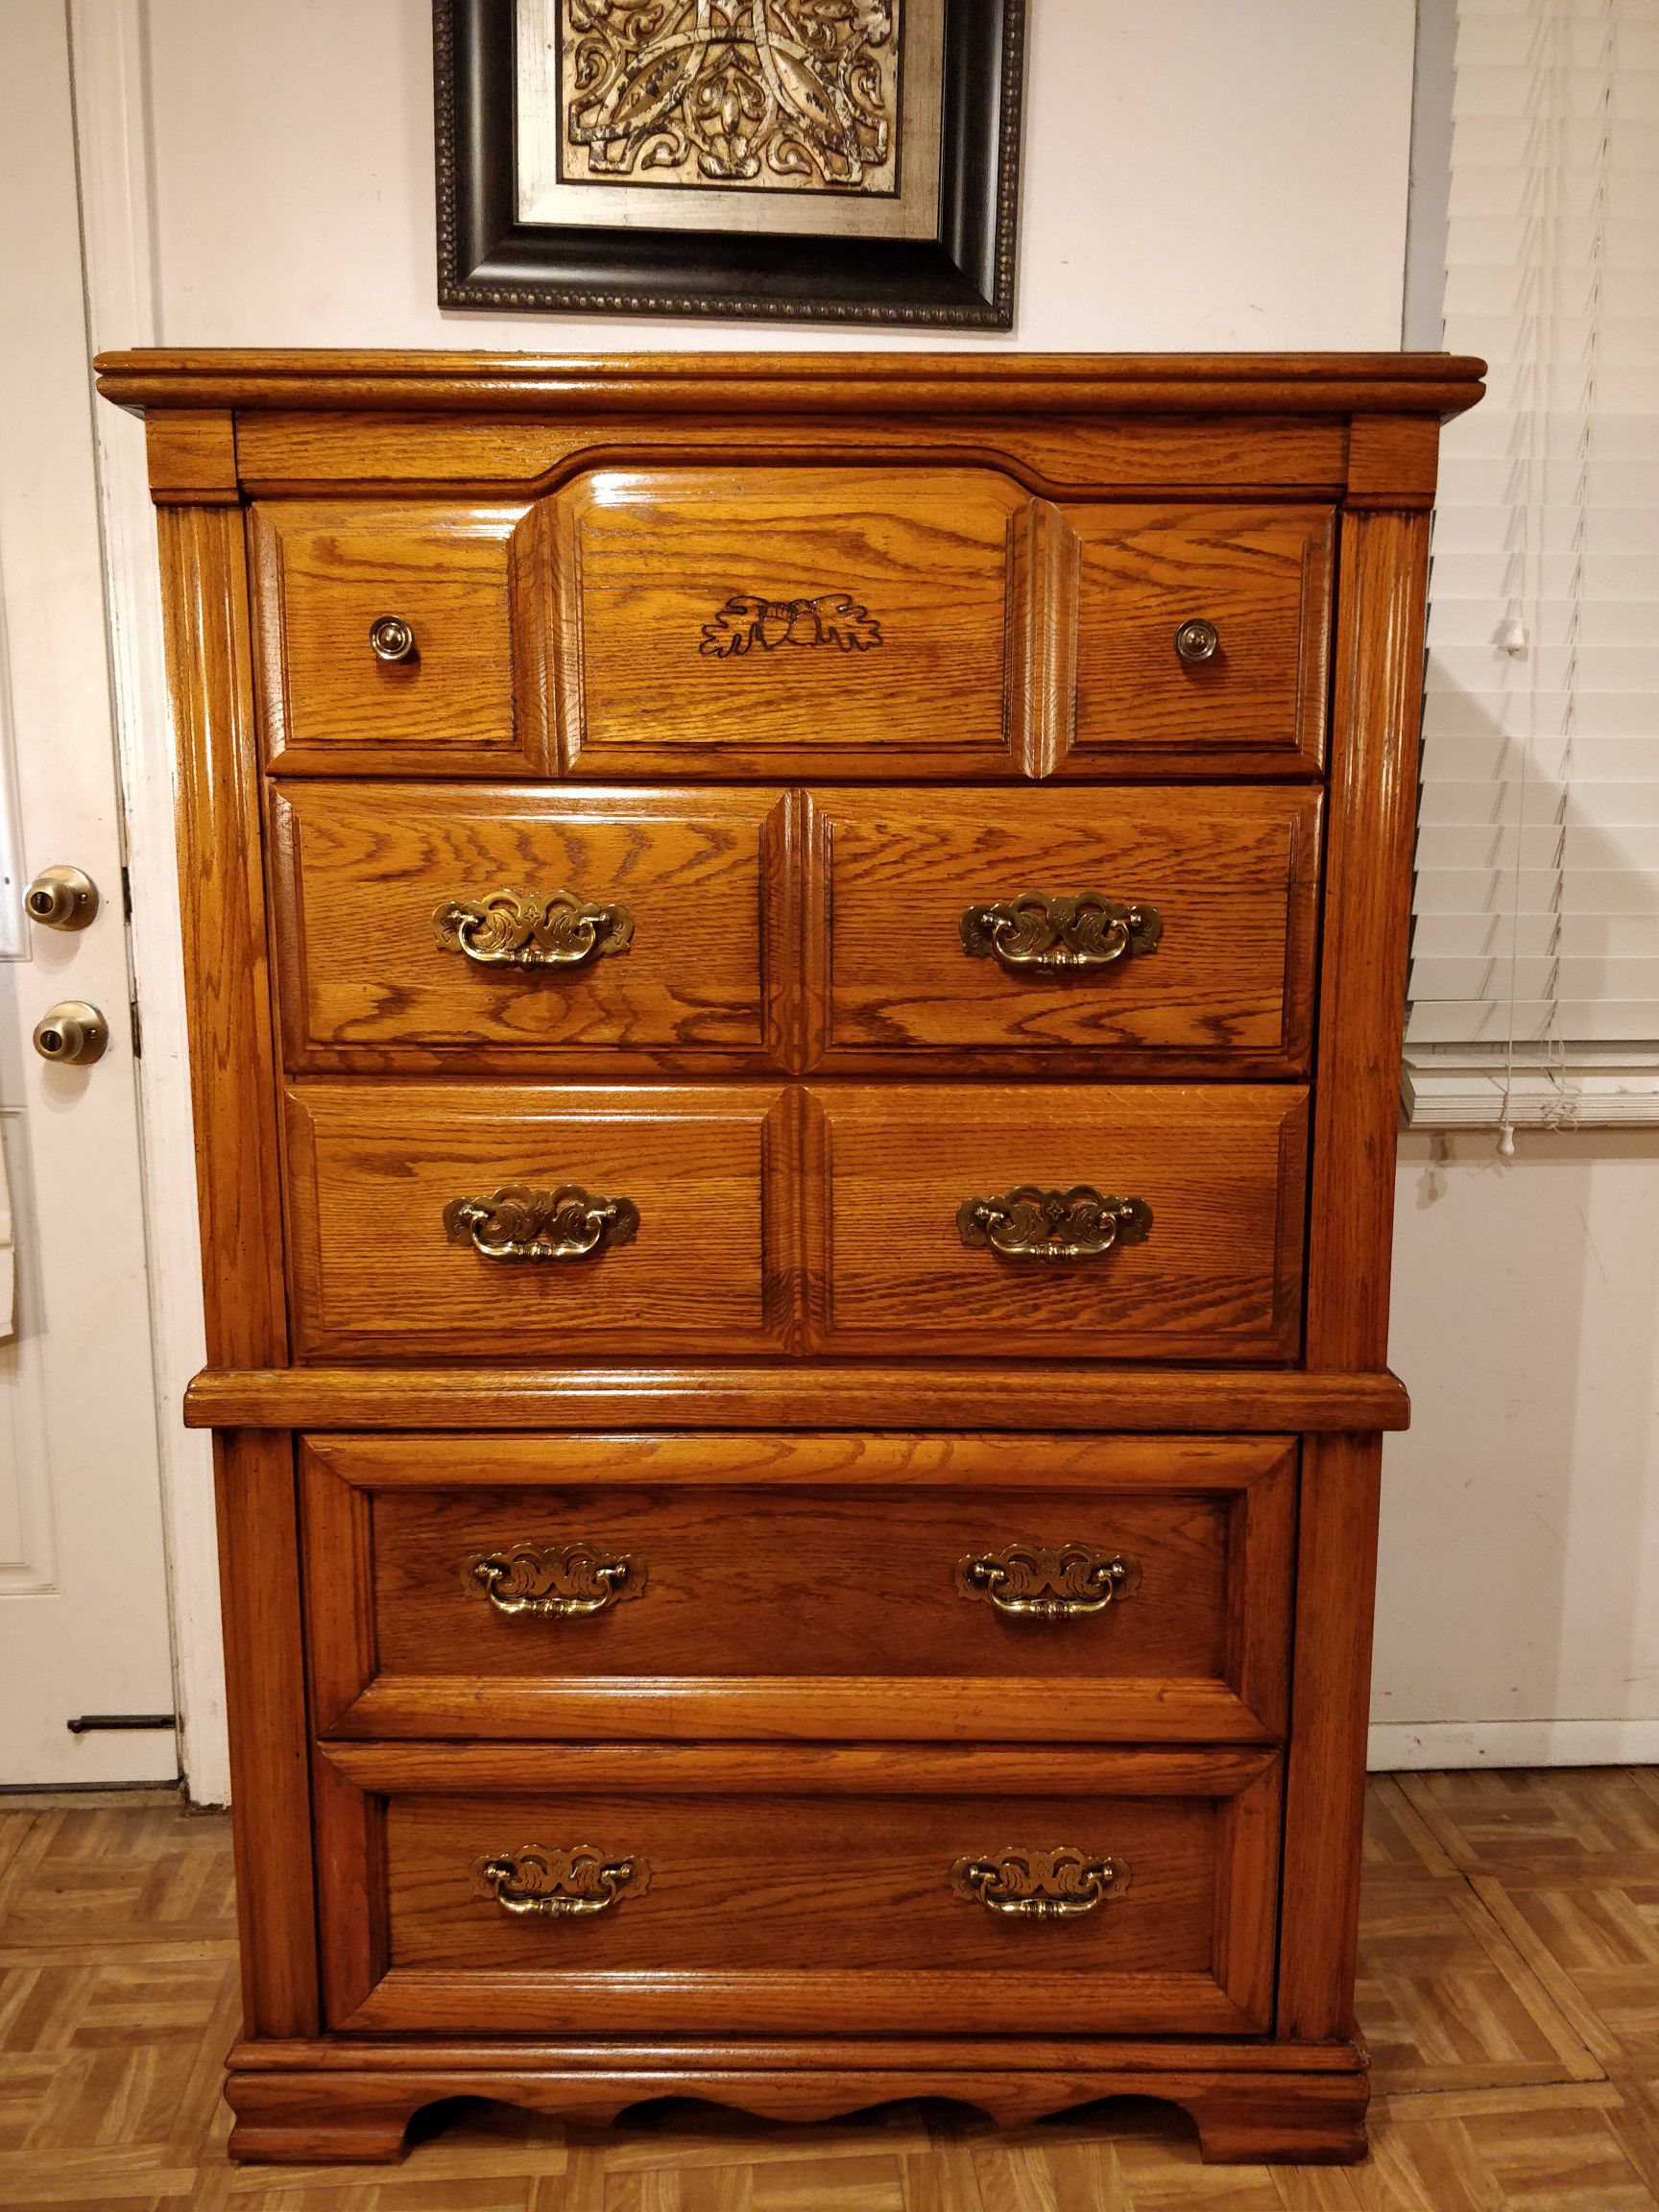 Big (BROYHILL) chest dresser with big drawers, made in USA, all drawers sliding smoothly, pet free smoke free,let me know when can you come to see it,